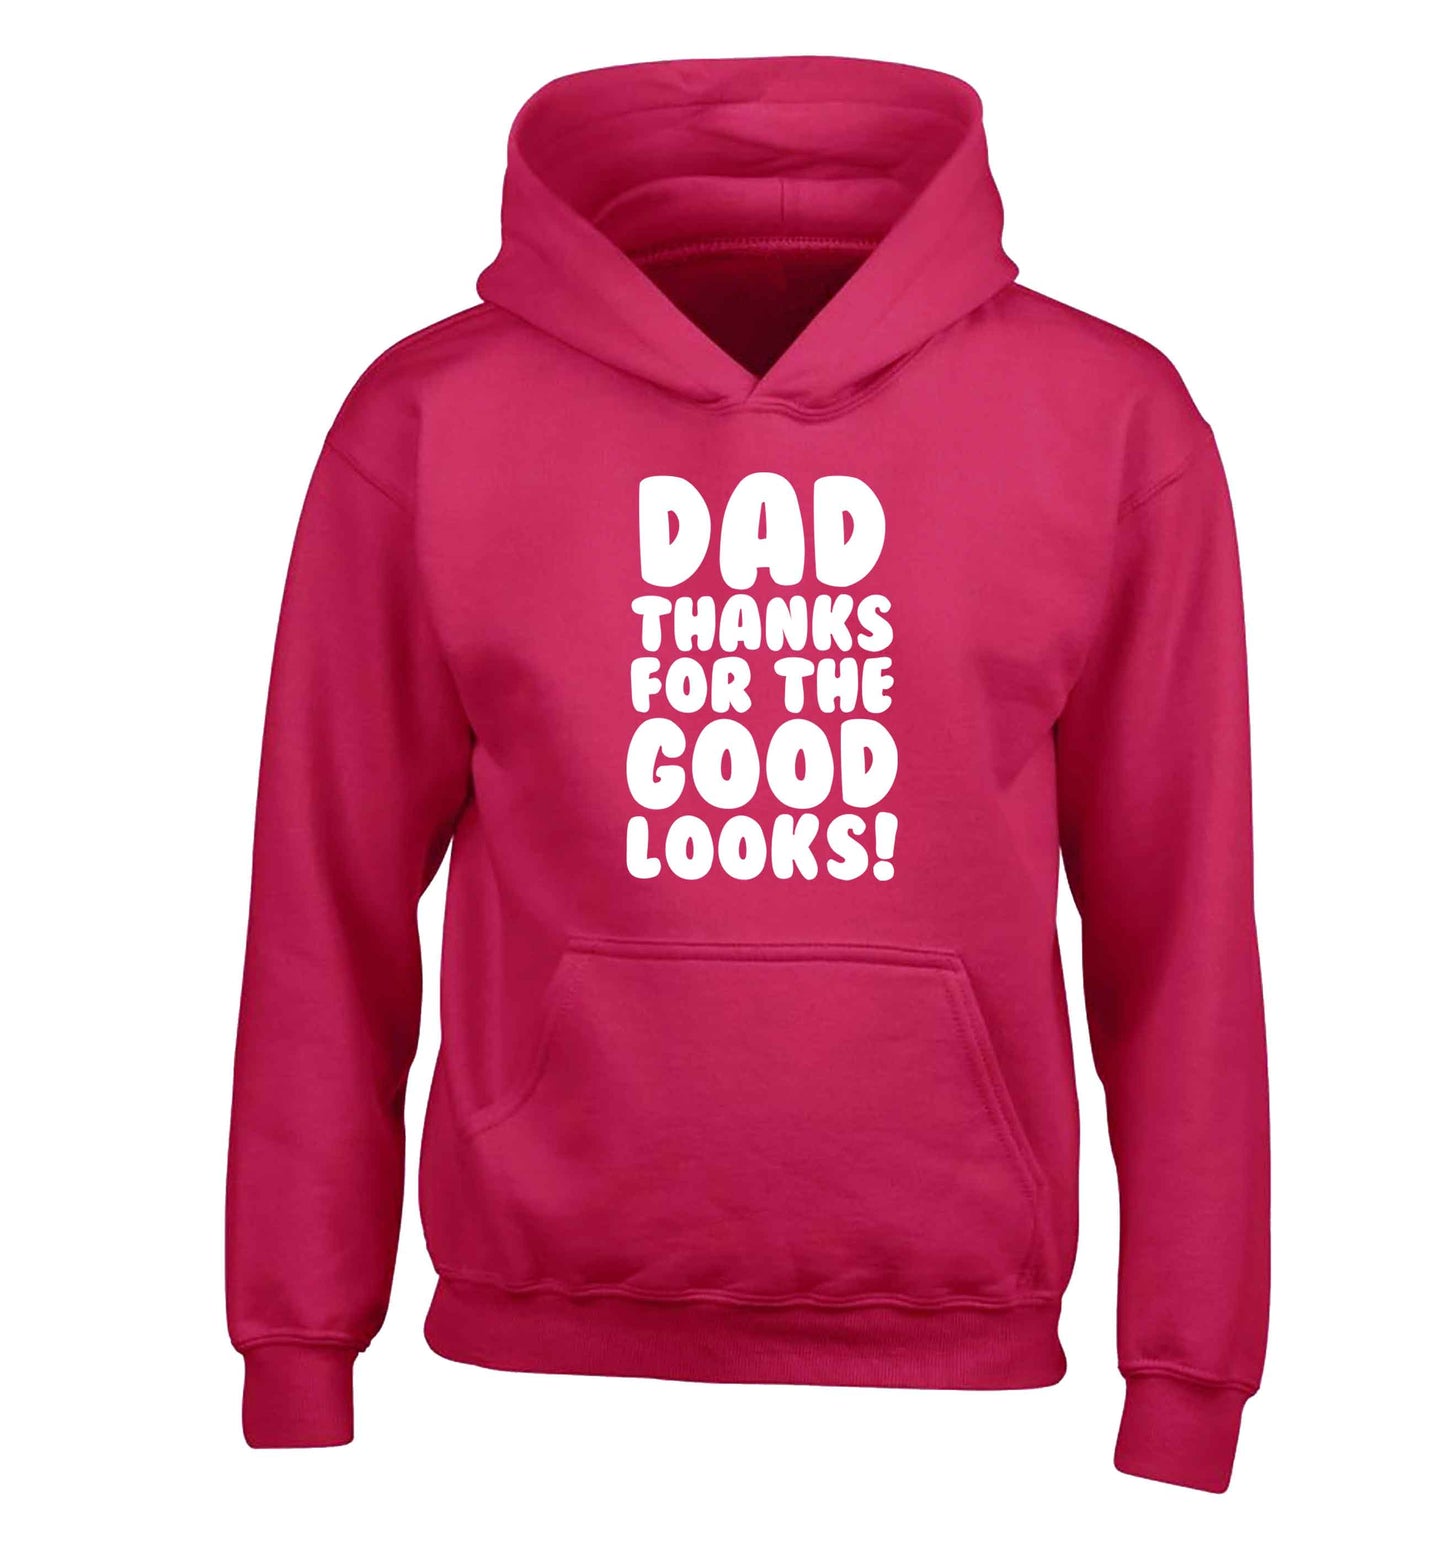 Dad thanks for the good looks children's pink hoodie 12-13 Years